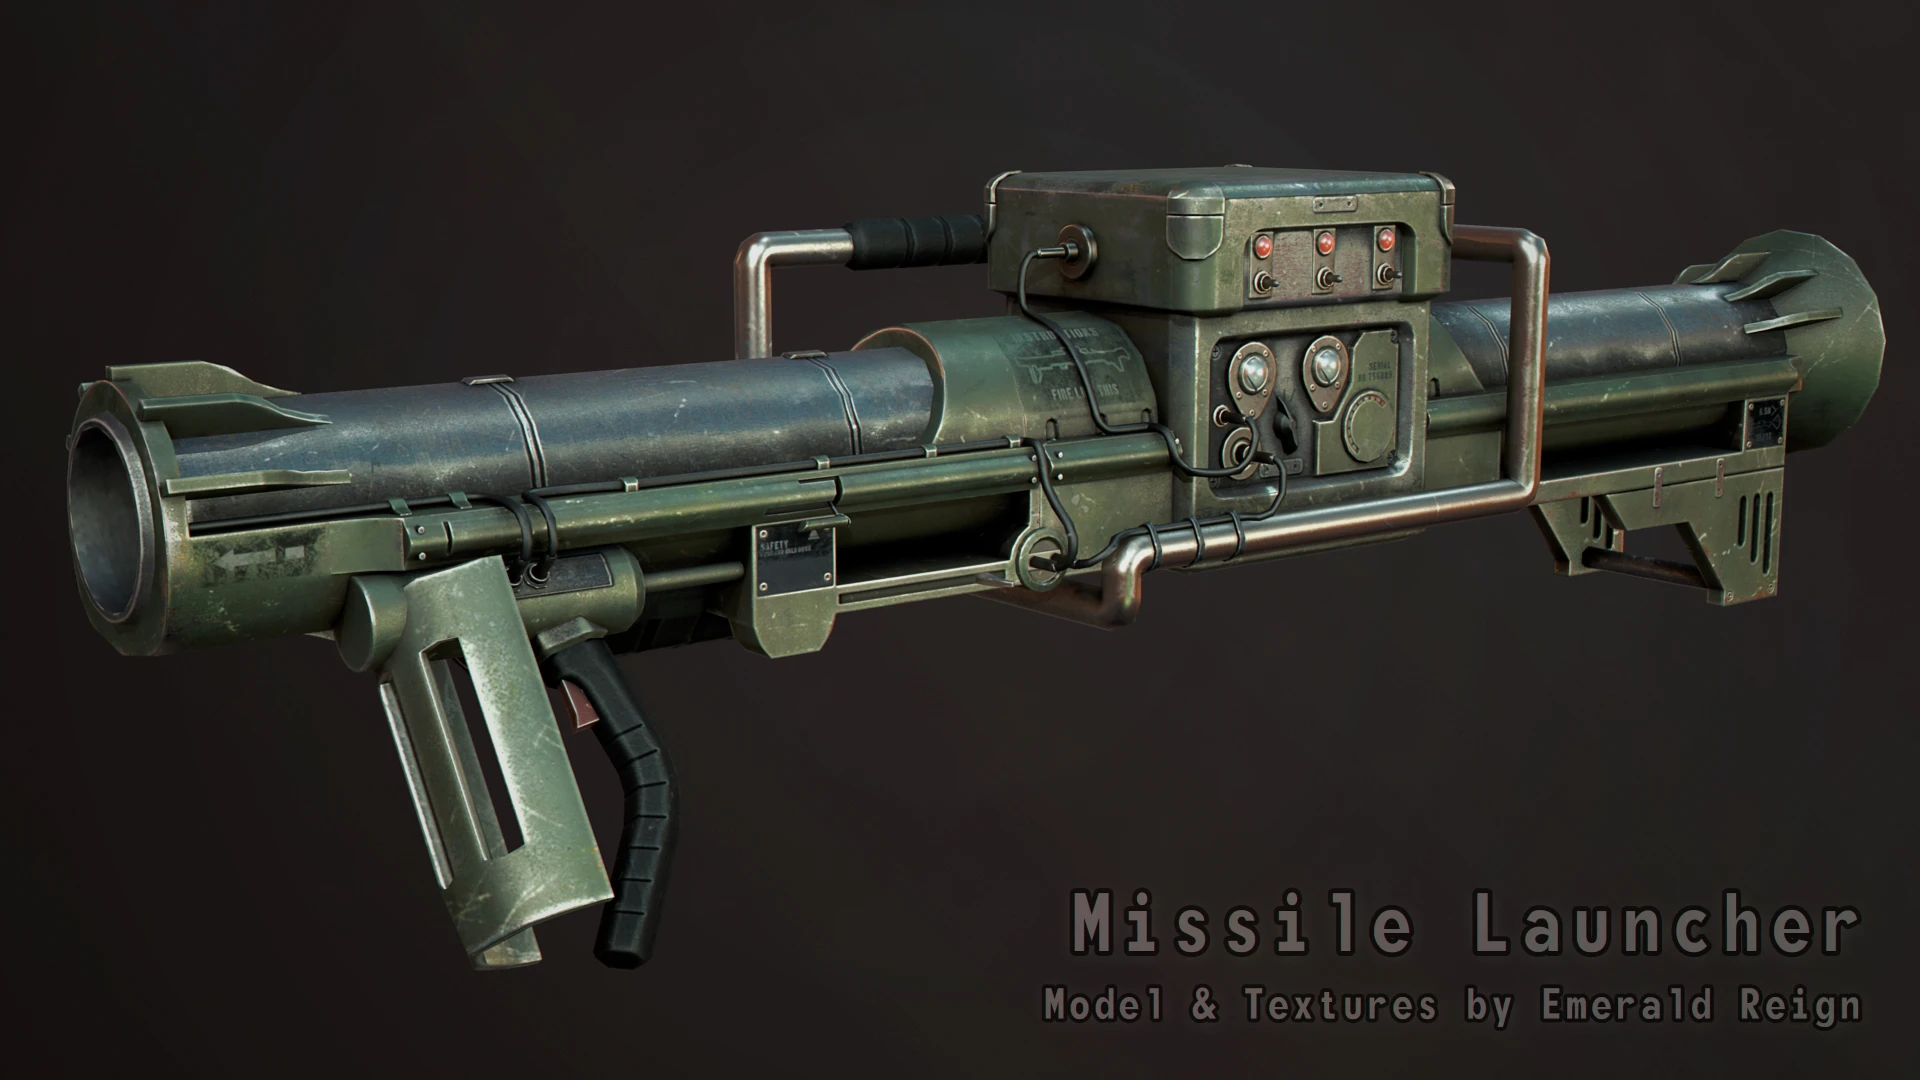 fallout new vegas missile launcher